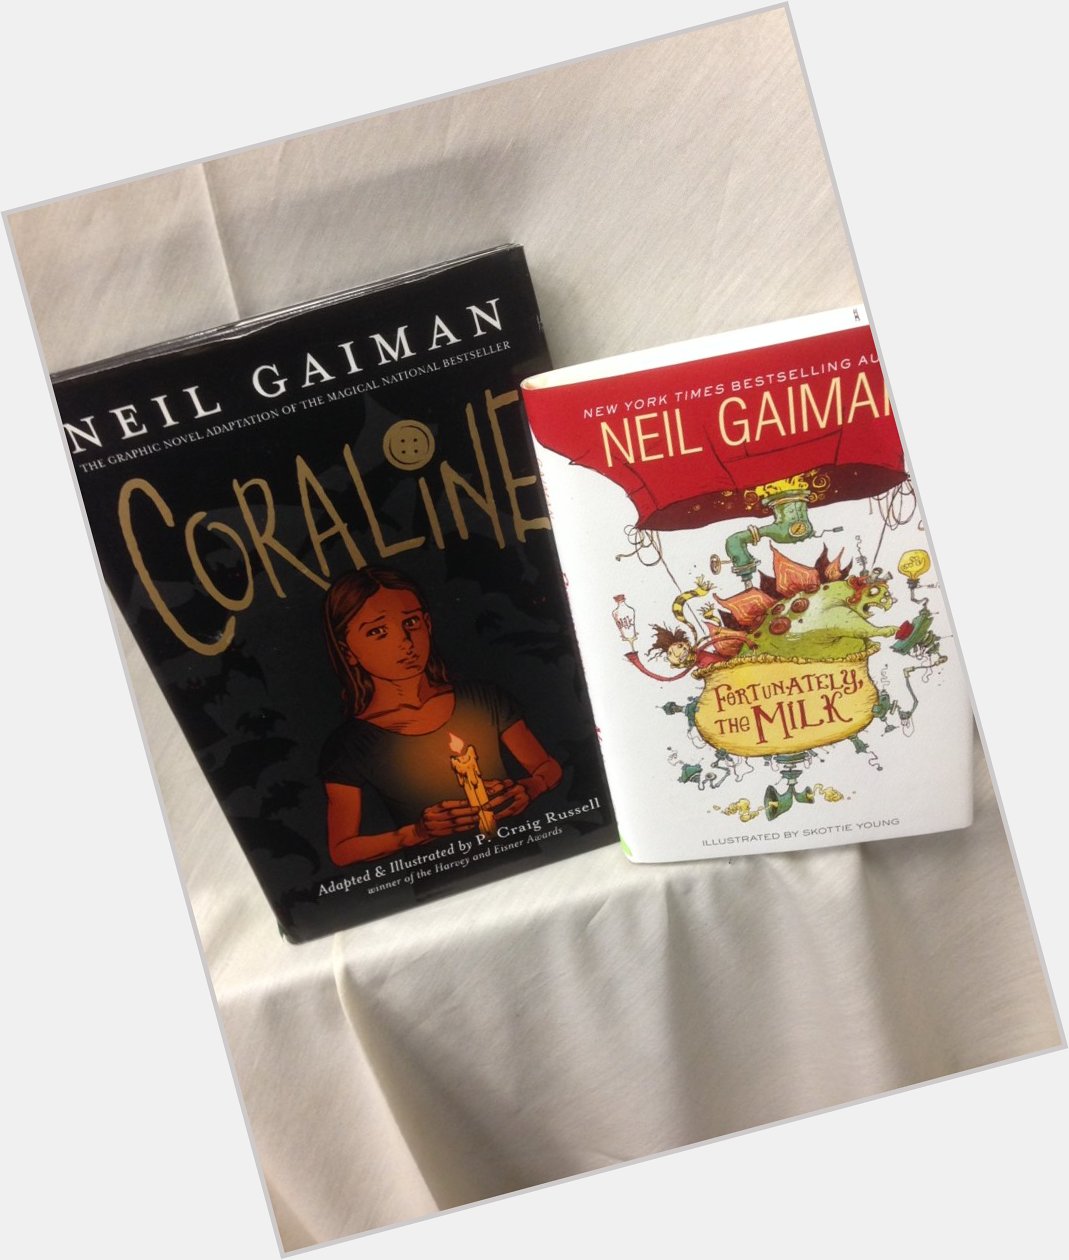 Happy Birthday Neil Gaiman! Come to the Center and read these titles! 